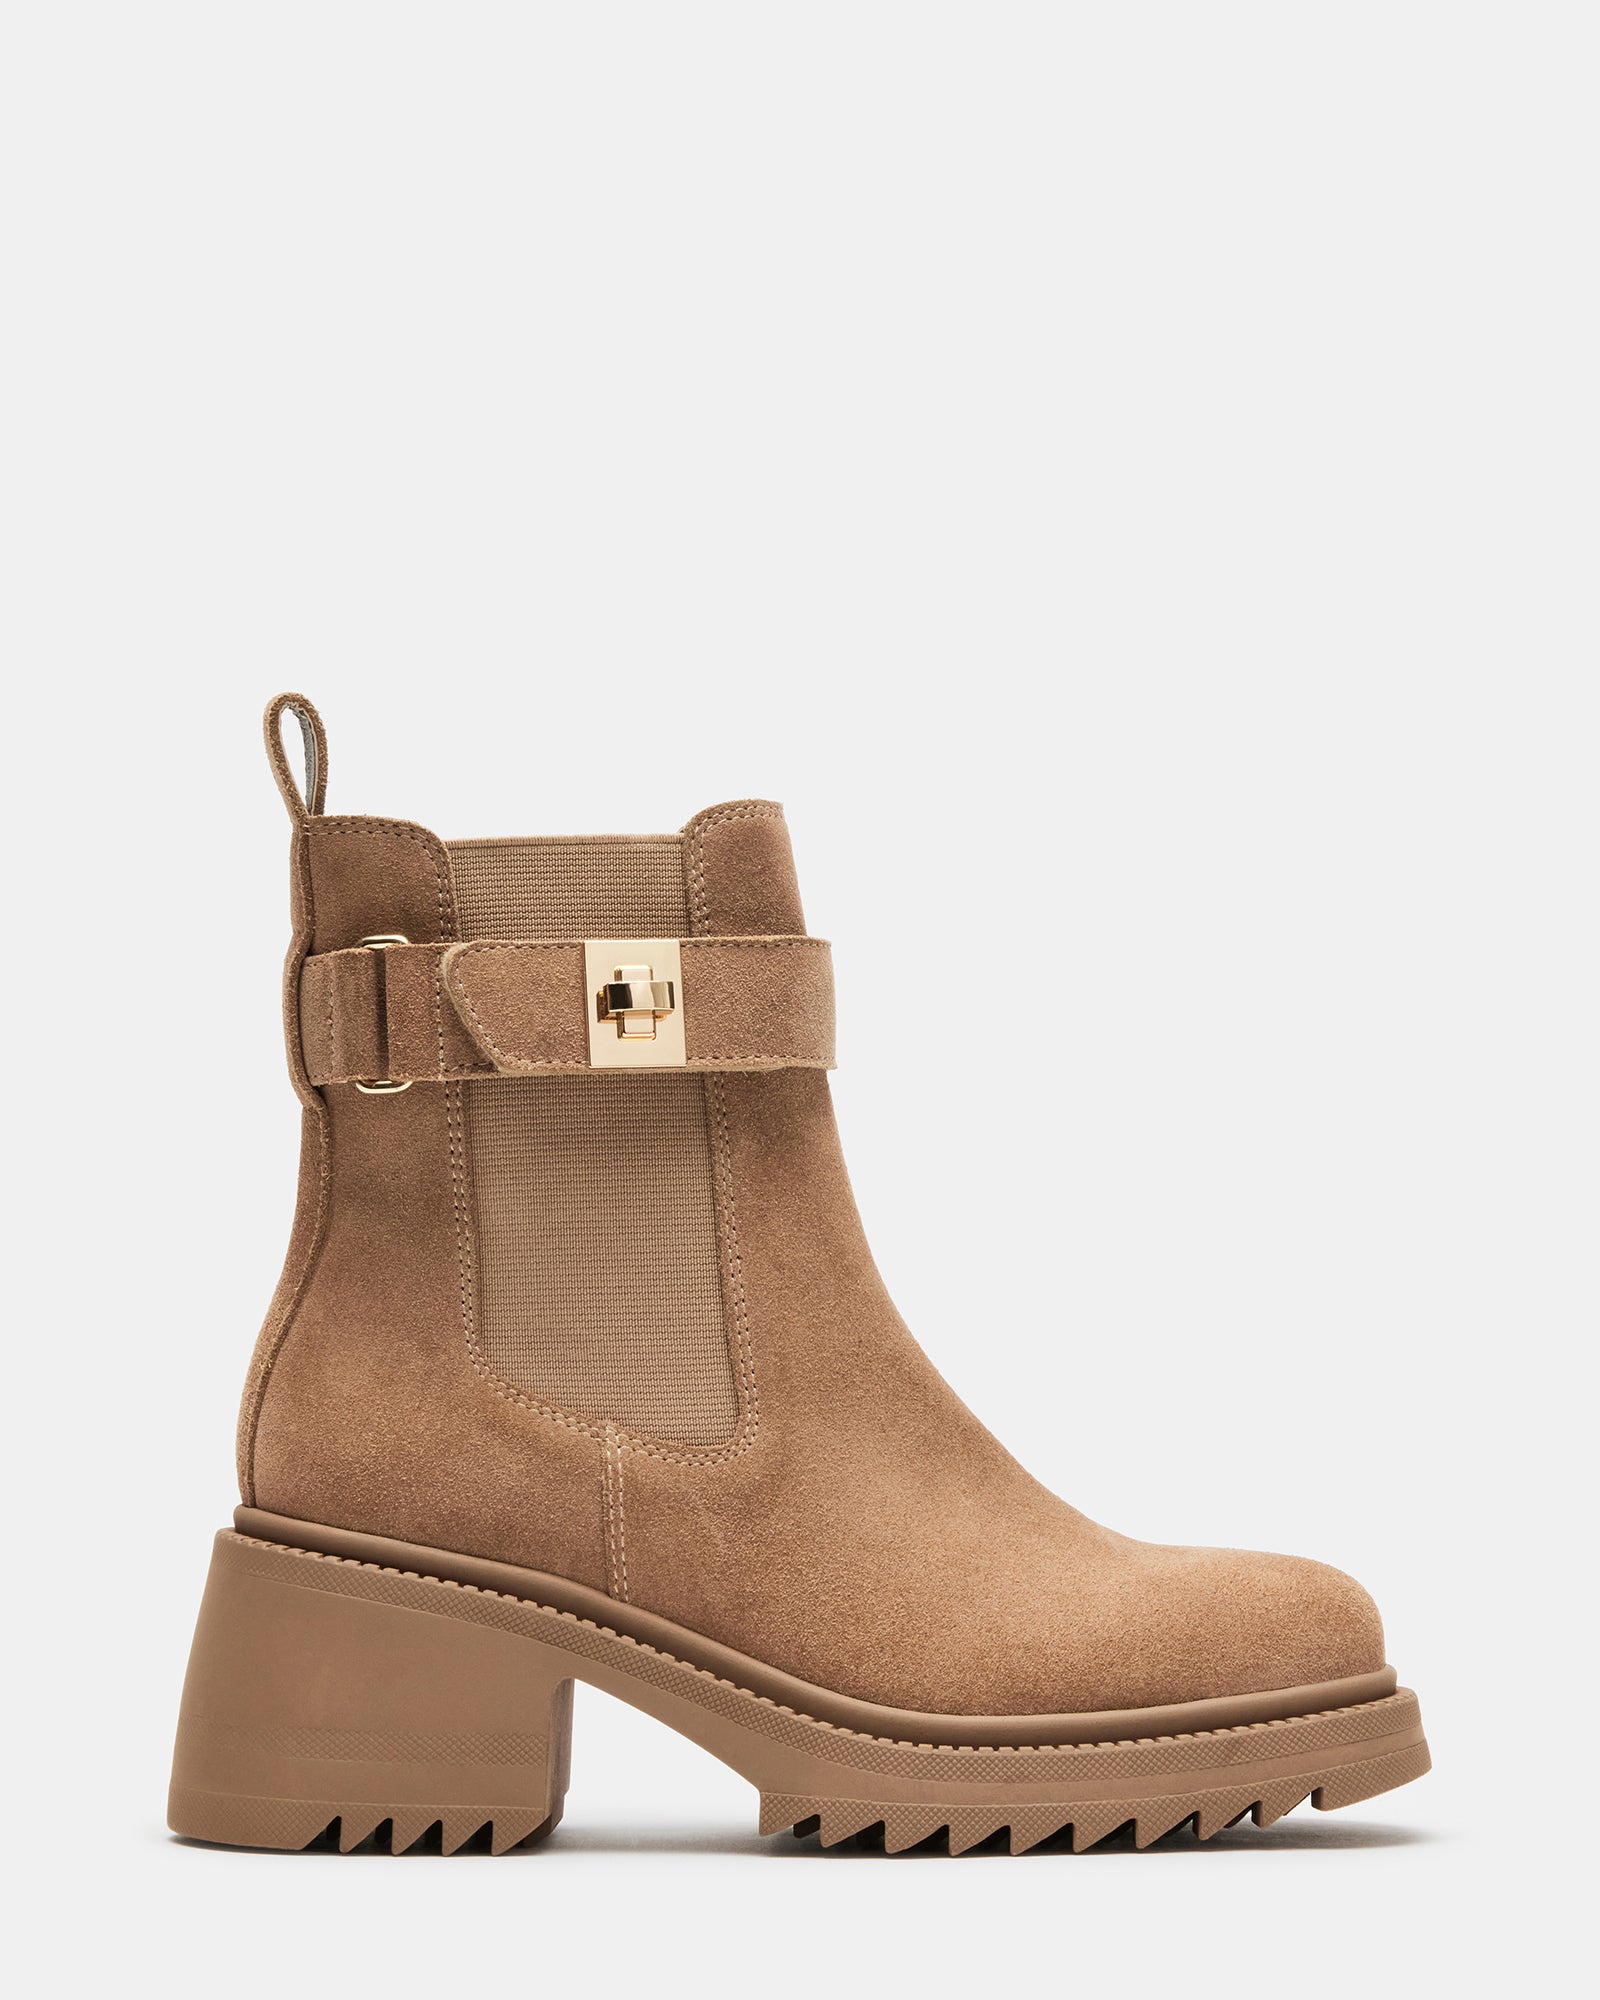 GATES Taupe Suede Lug Sole Chelsea Bootie | Women's Booties